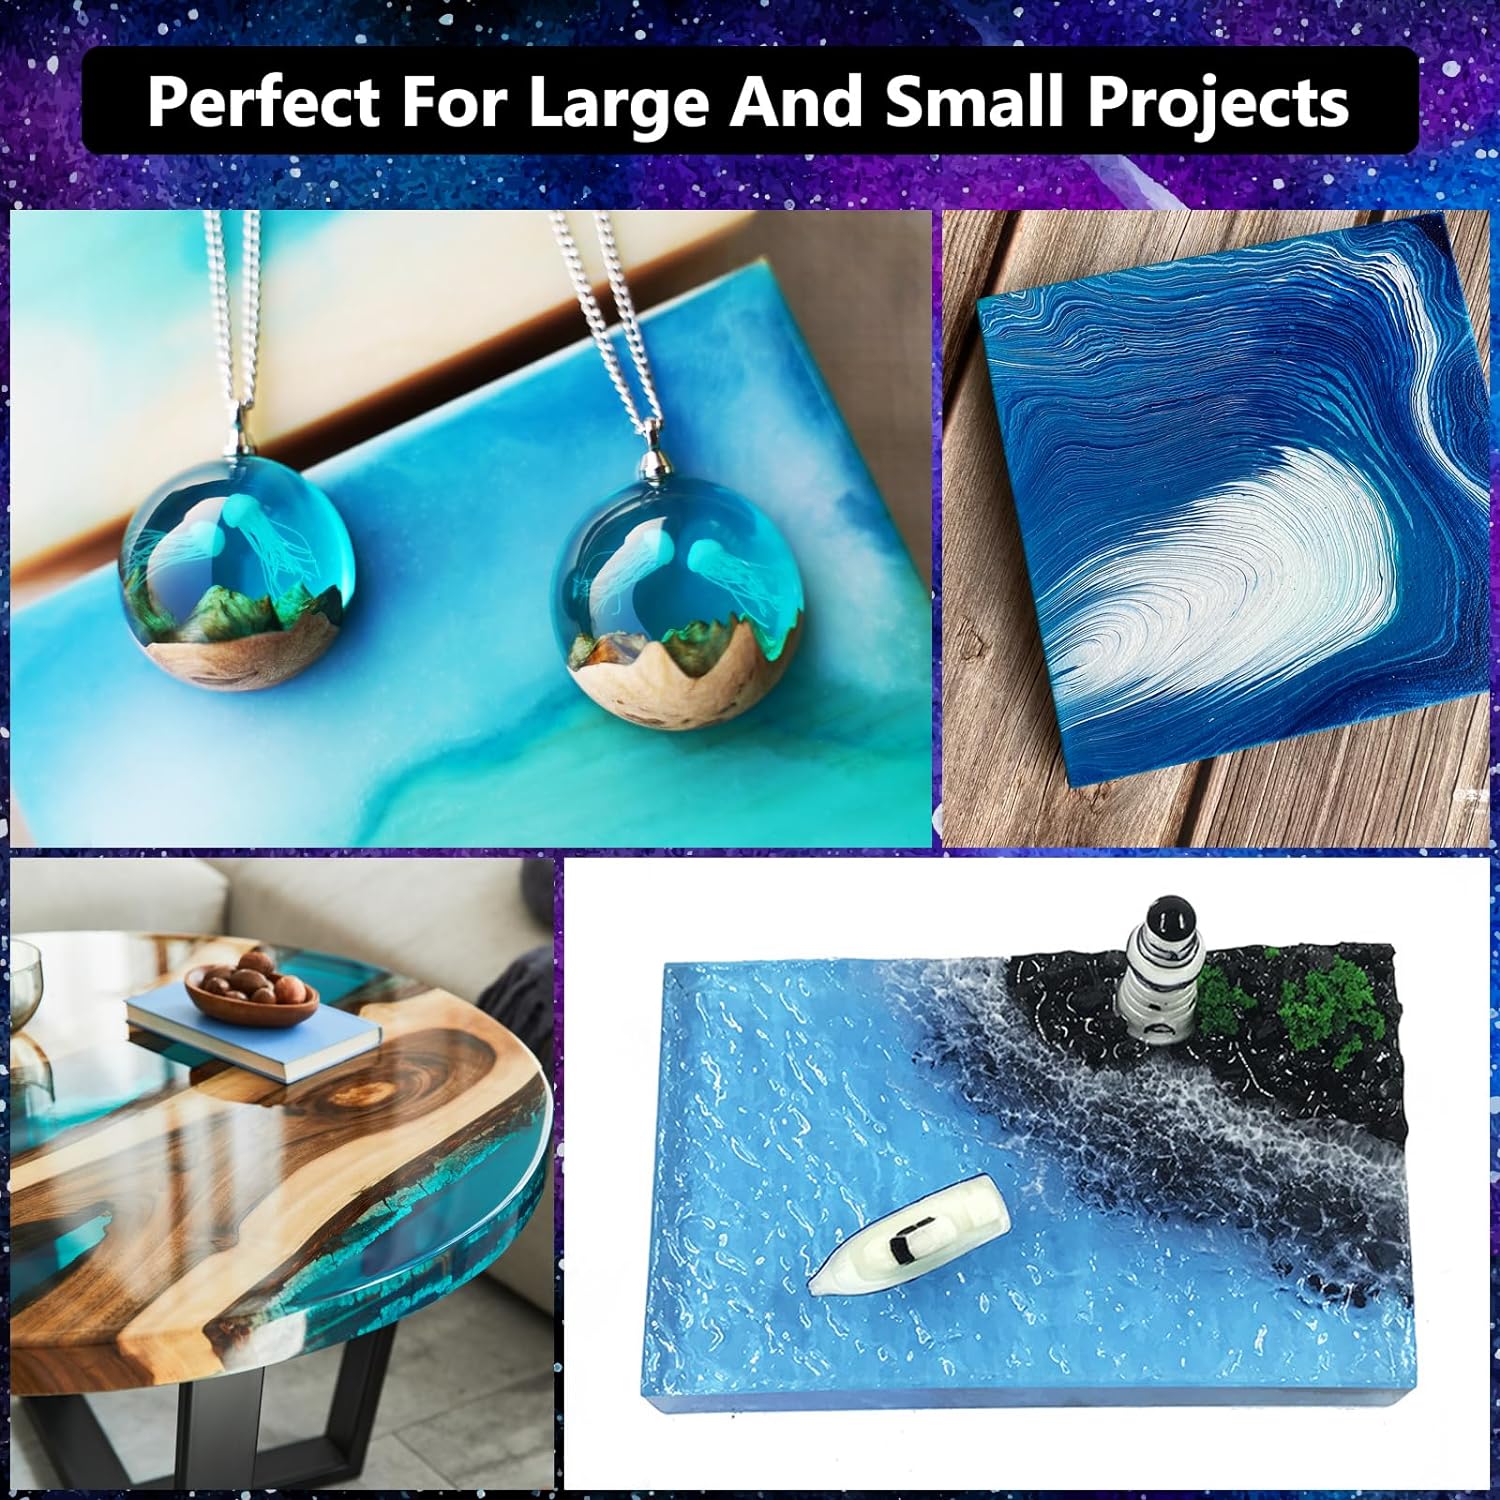 Craft Resin Epoxy Resin Kit for Beginners with Resin Molds, Table Top Art Resin Jewelry Casting DIY Tumblers & Wood 2 Gallon 2 Part Resin Epoxy Kit